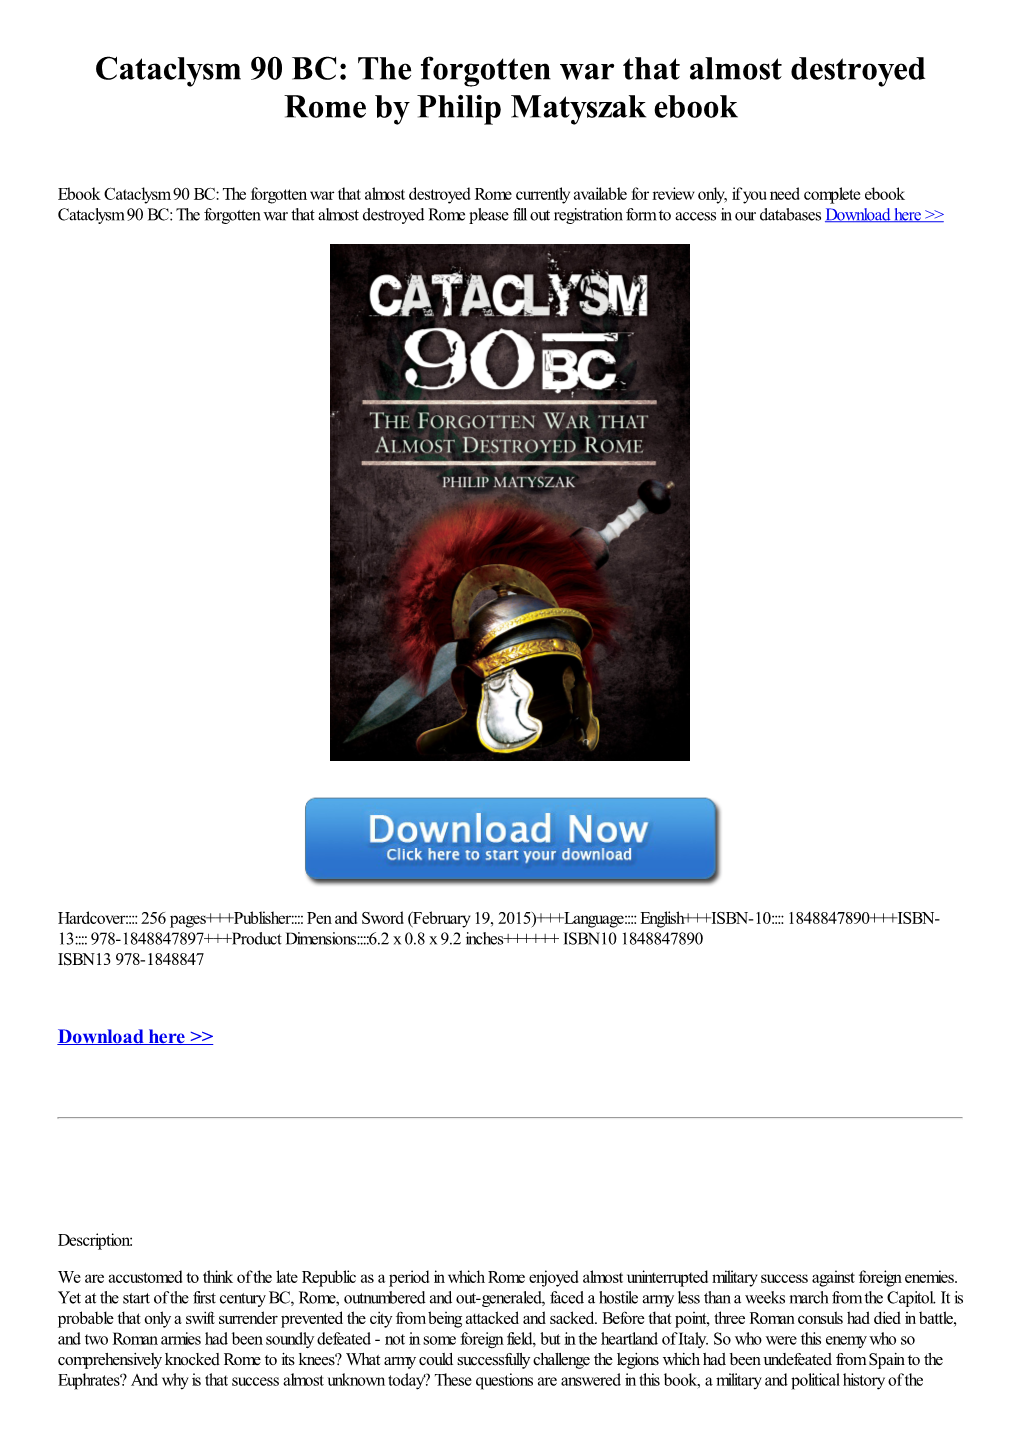 Download Ebook Cataclysm 90 BC: the Forgotten War That Almost Destroyed Rome by Philip Matyszak [Ebook]